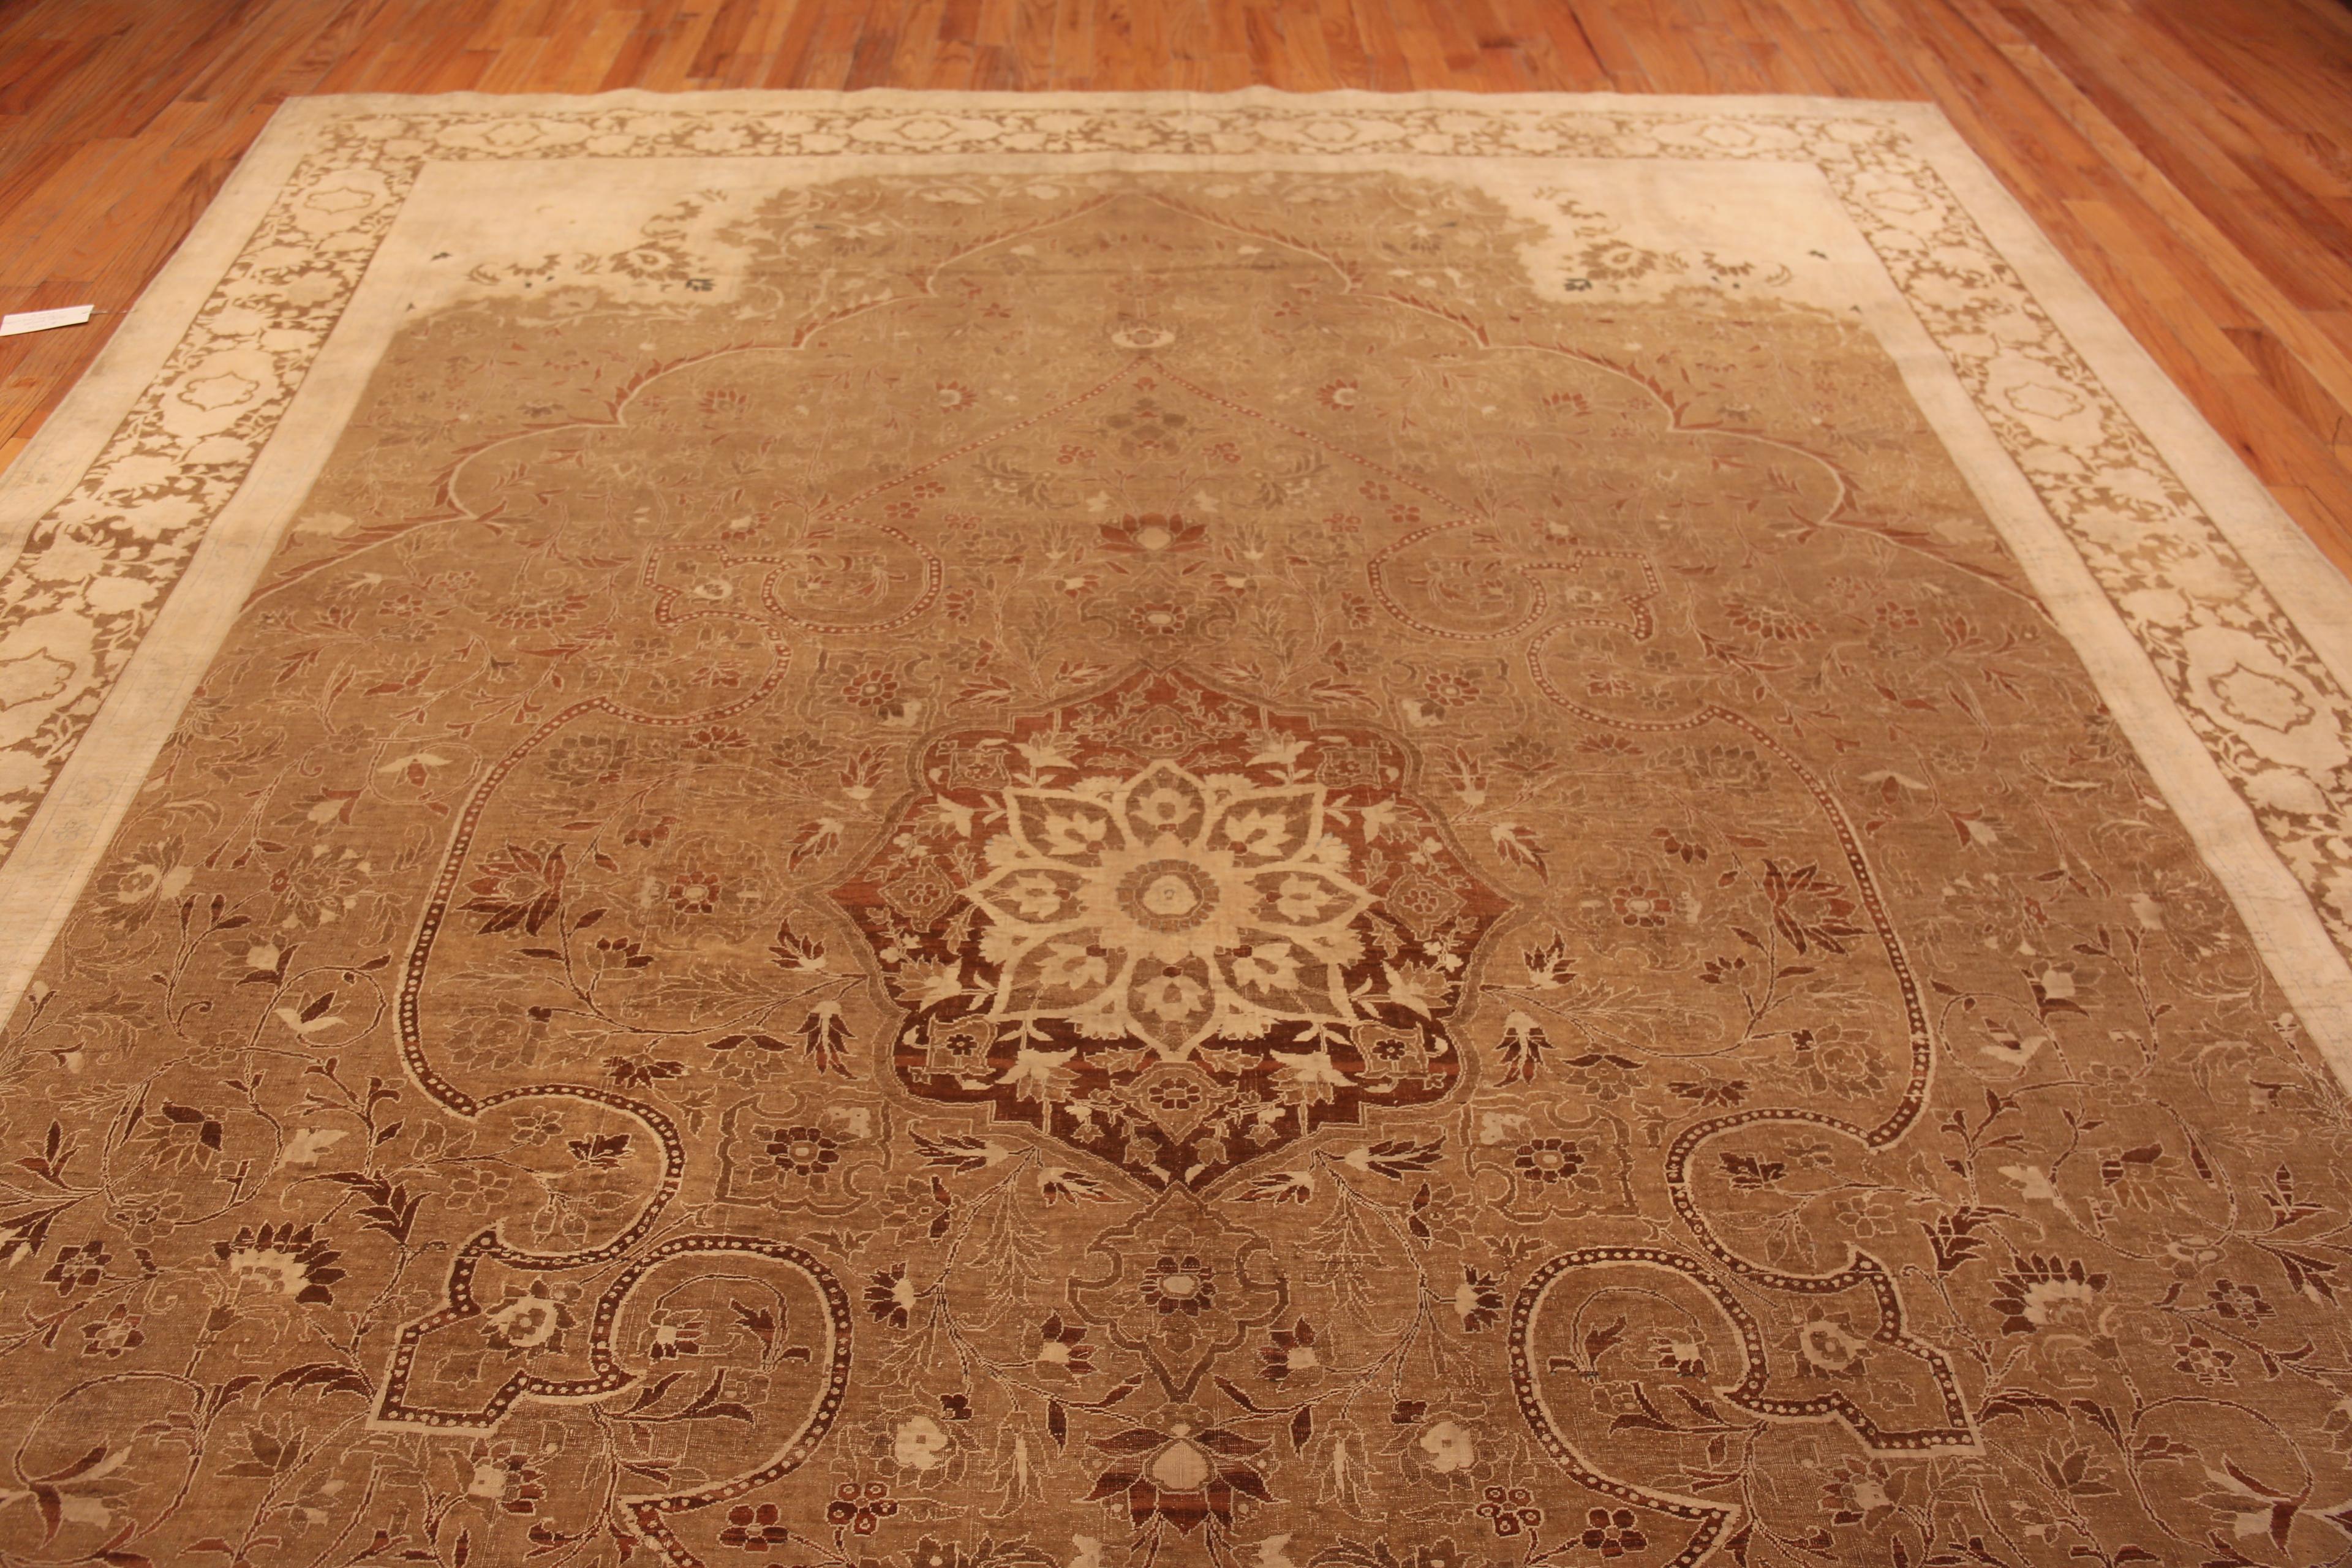 A Truly Remarkable Rare And Beautiful Soft Color Wool and Cotton Pile Fine Weave Antique Persian Tabriz Rug, Country Of Origin / Rug Type: Antique Persian Rug, Circa Date: Late 19th Century 